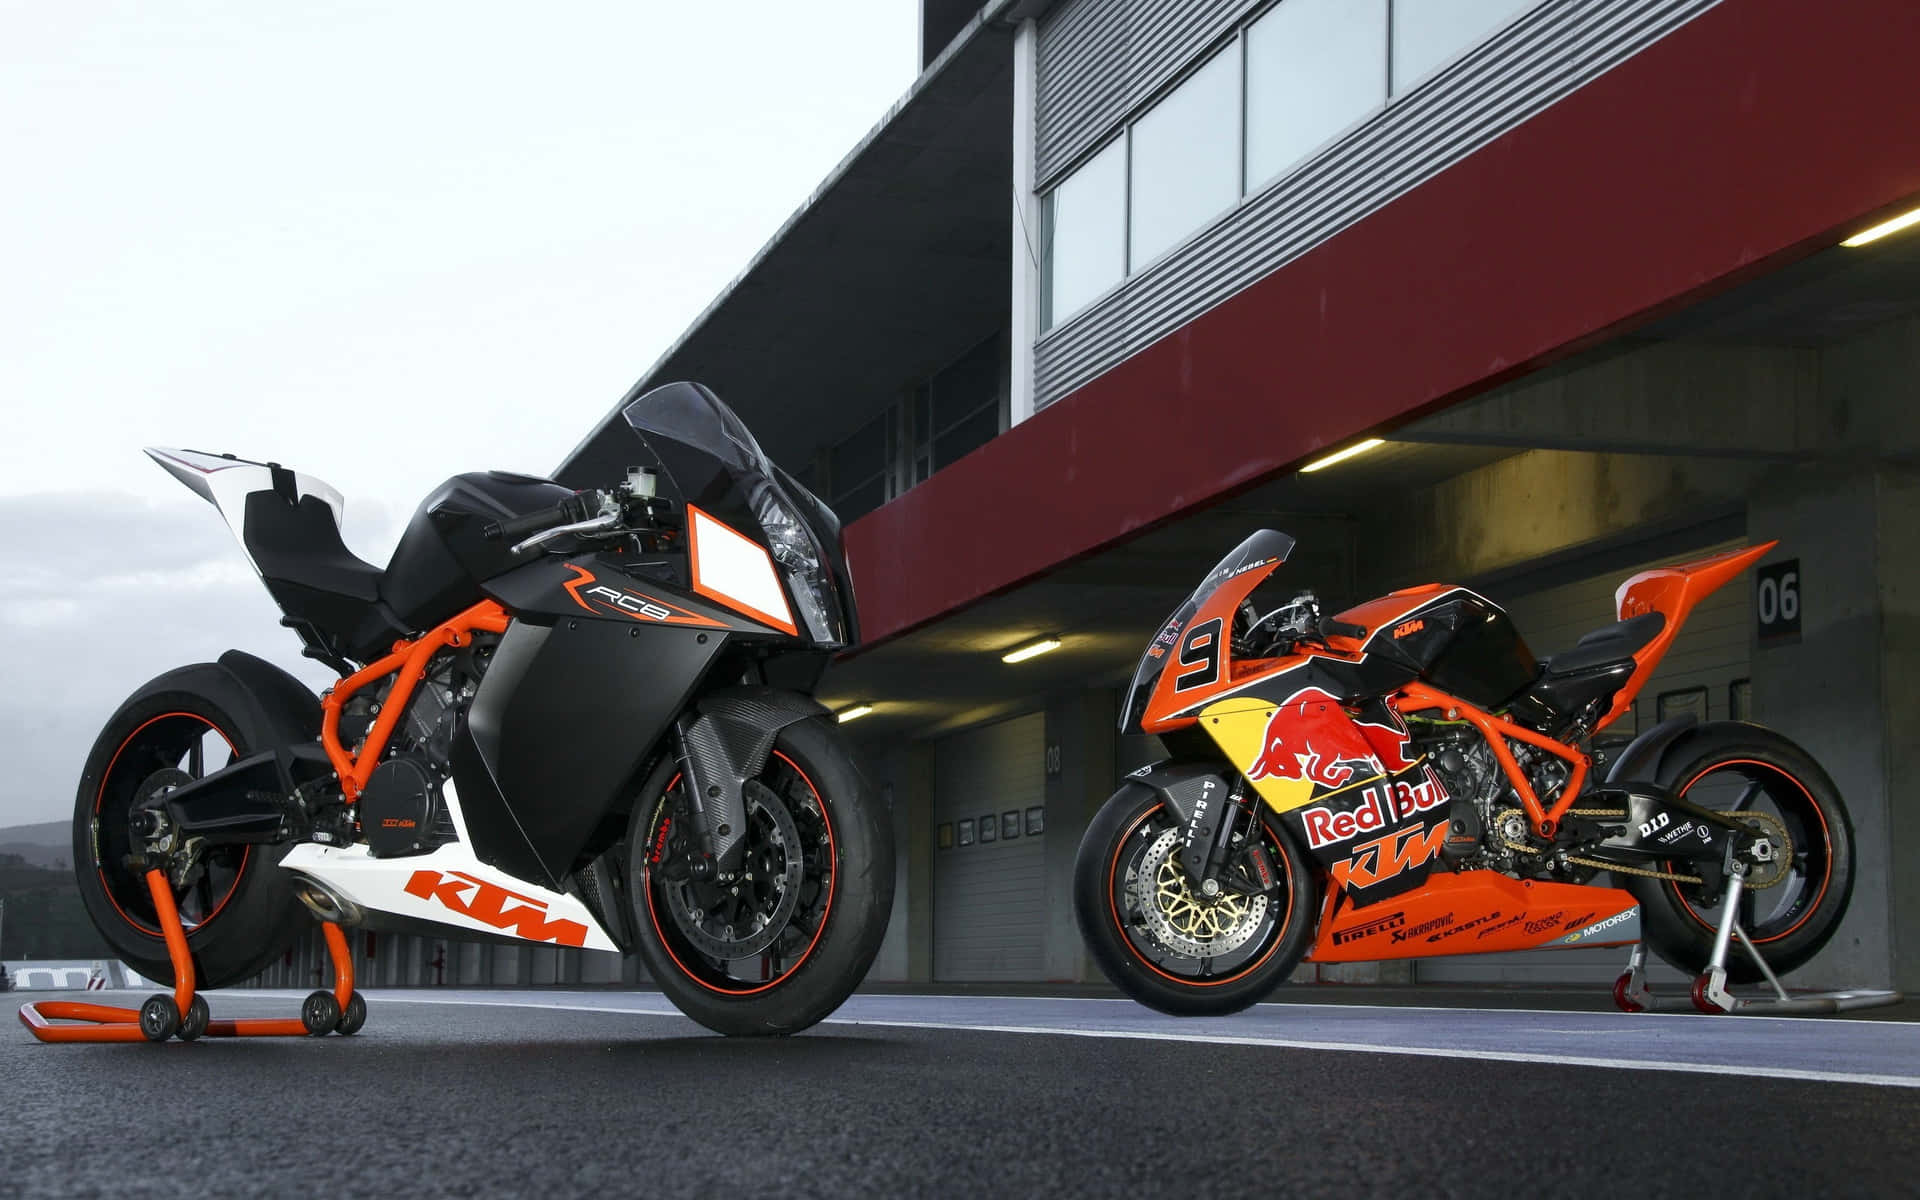 Exciting Ride With Ktm Motorcycle Wallpaper